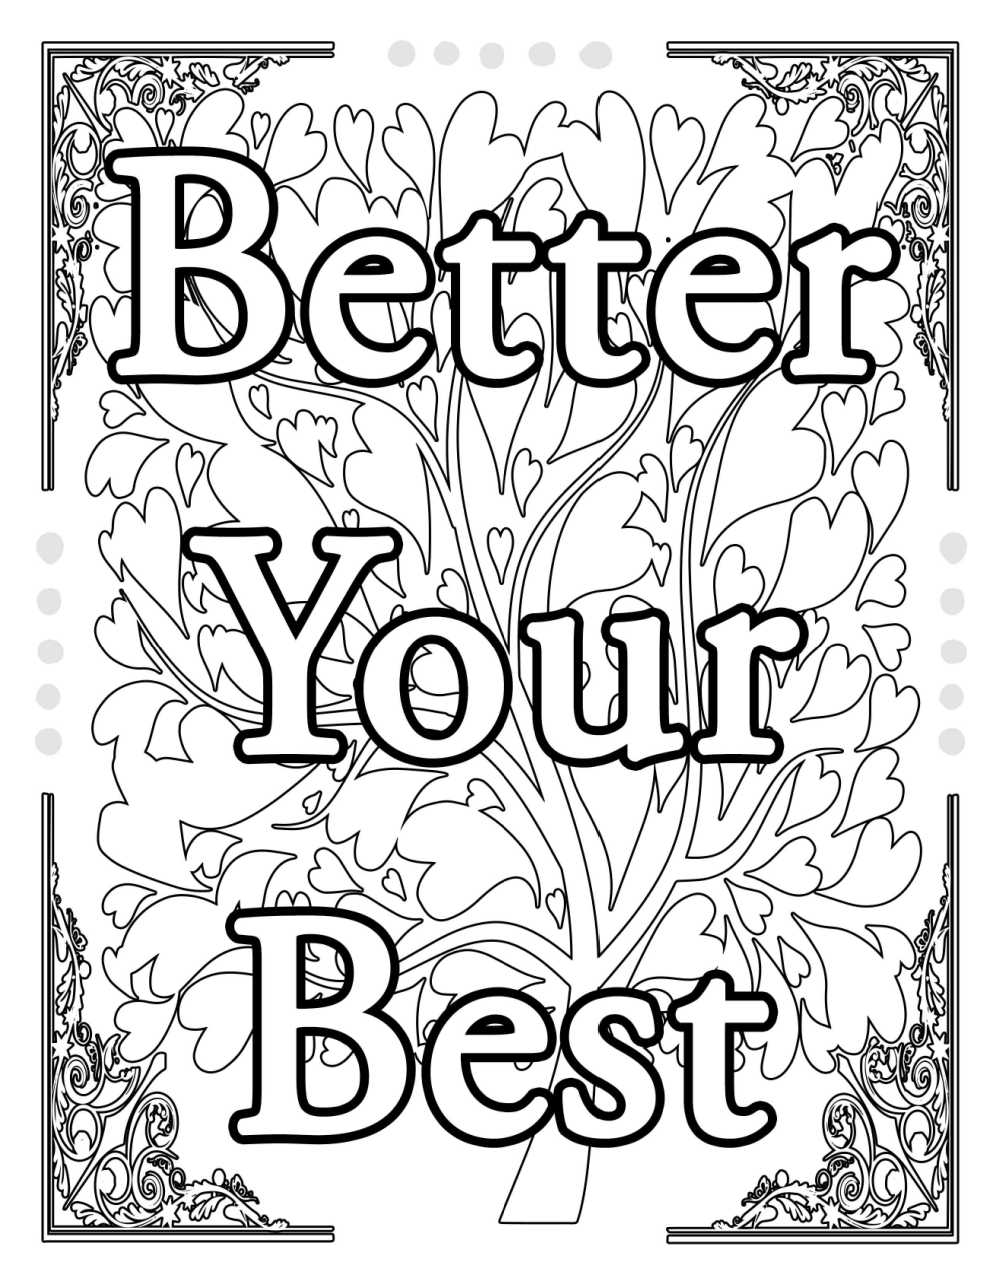 Better Your Best Motivational Coloring Page | Mama Likes This